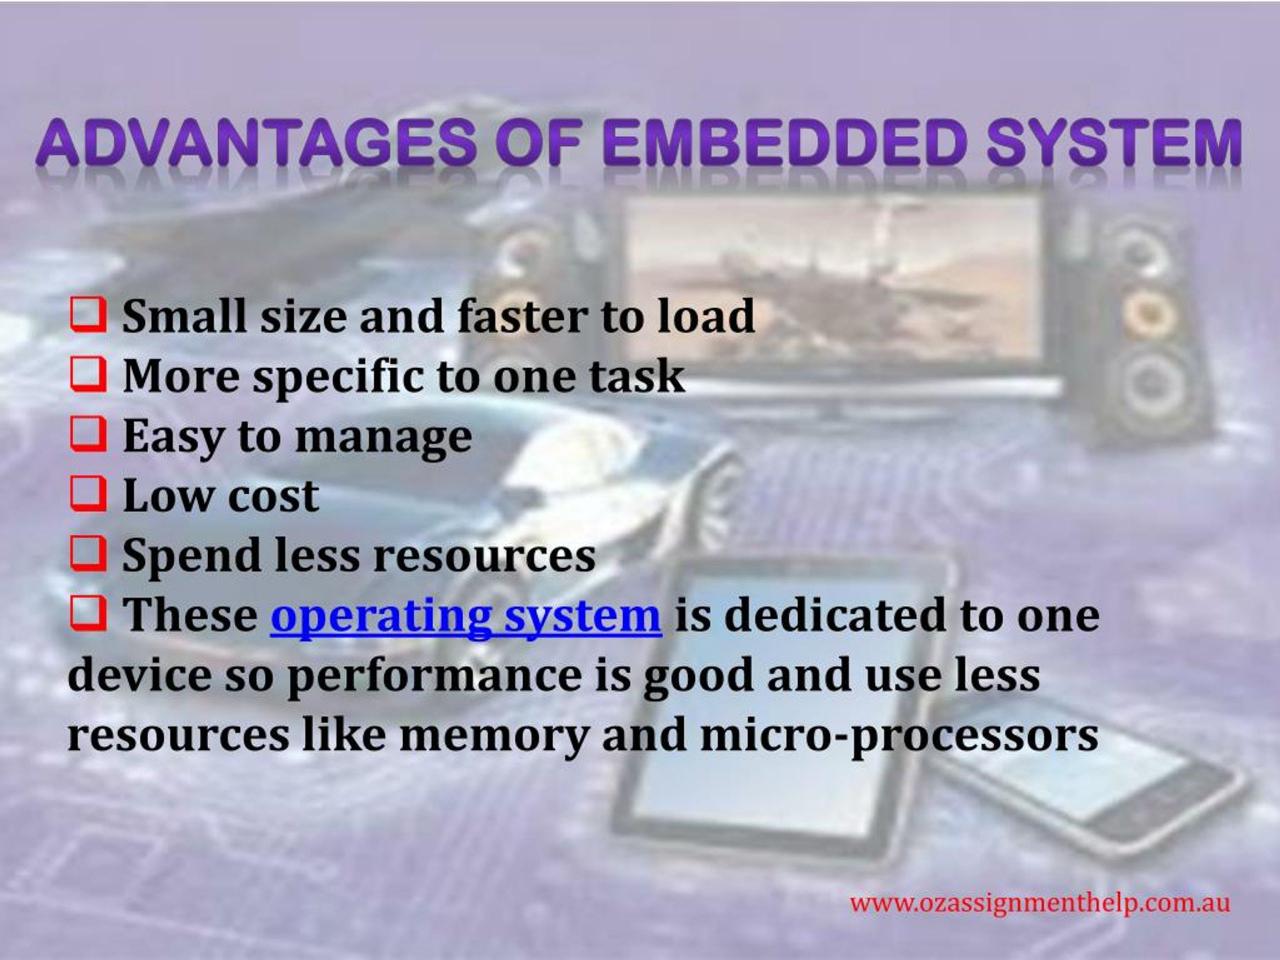 Advantages of an embedded system